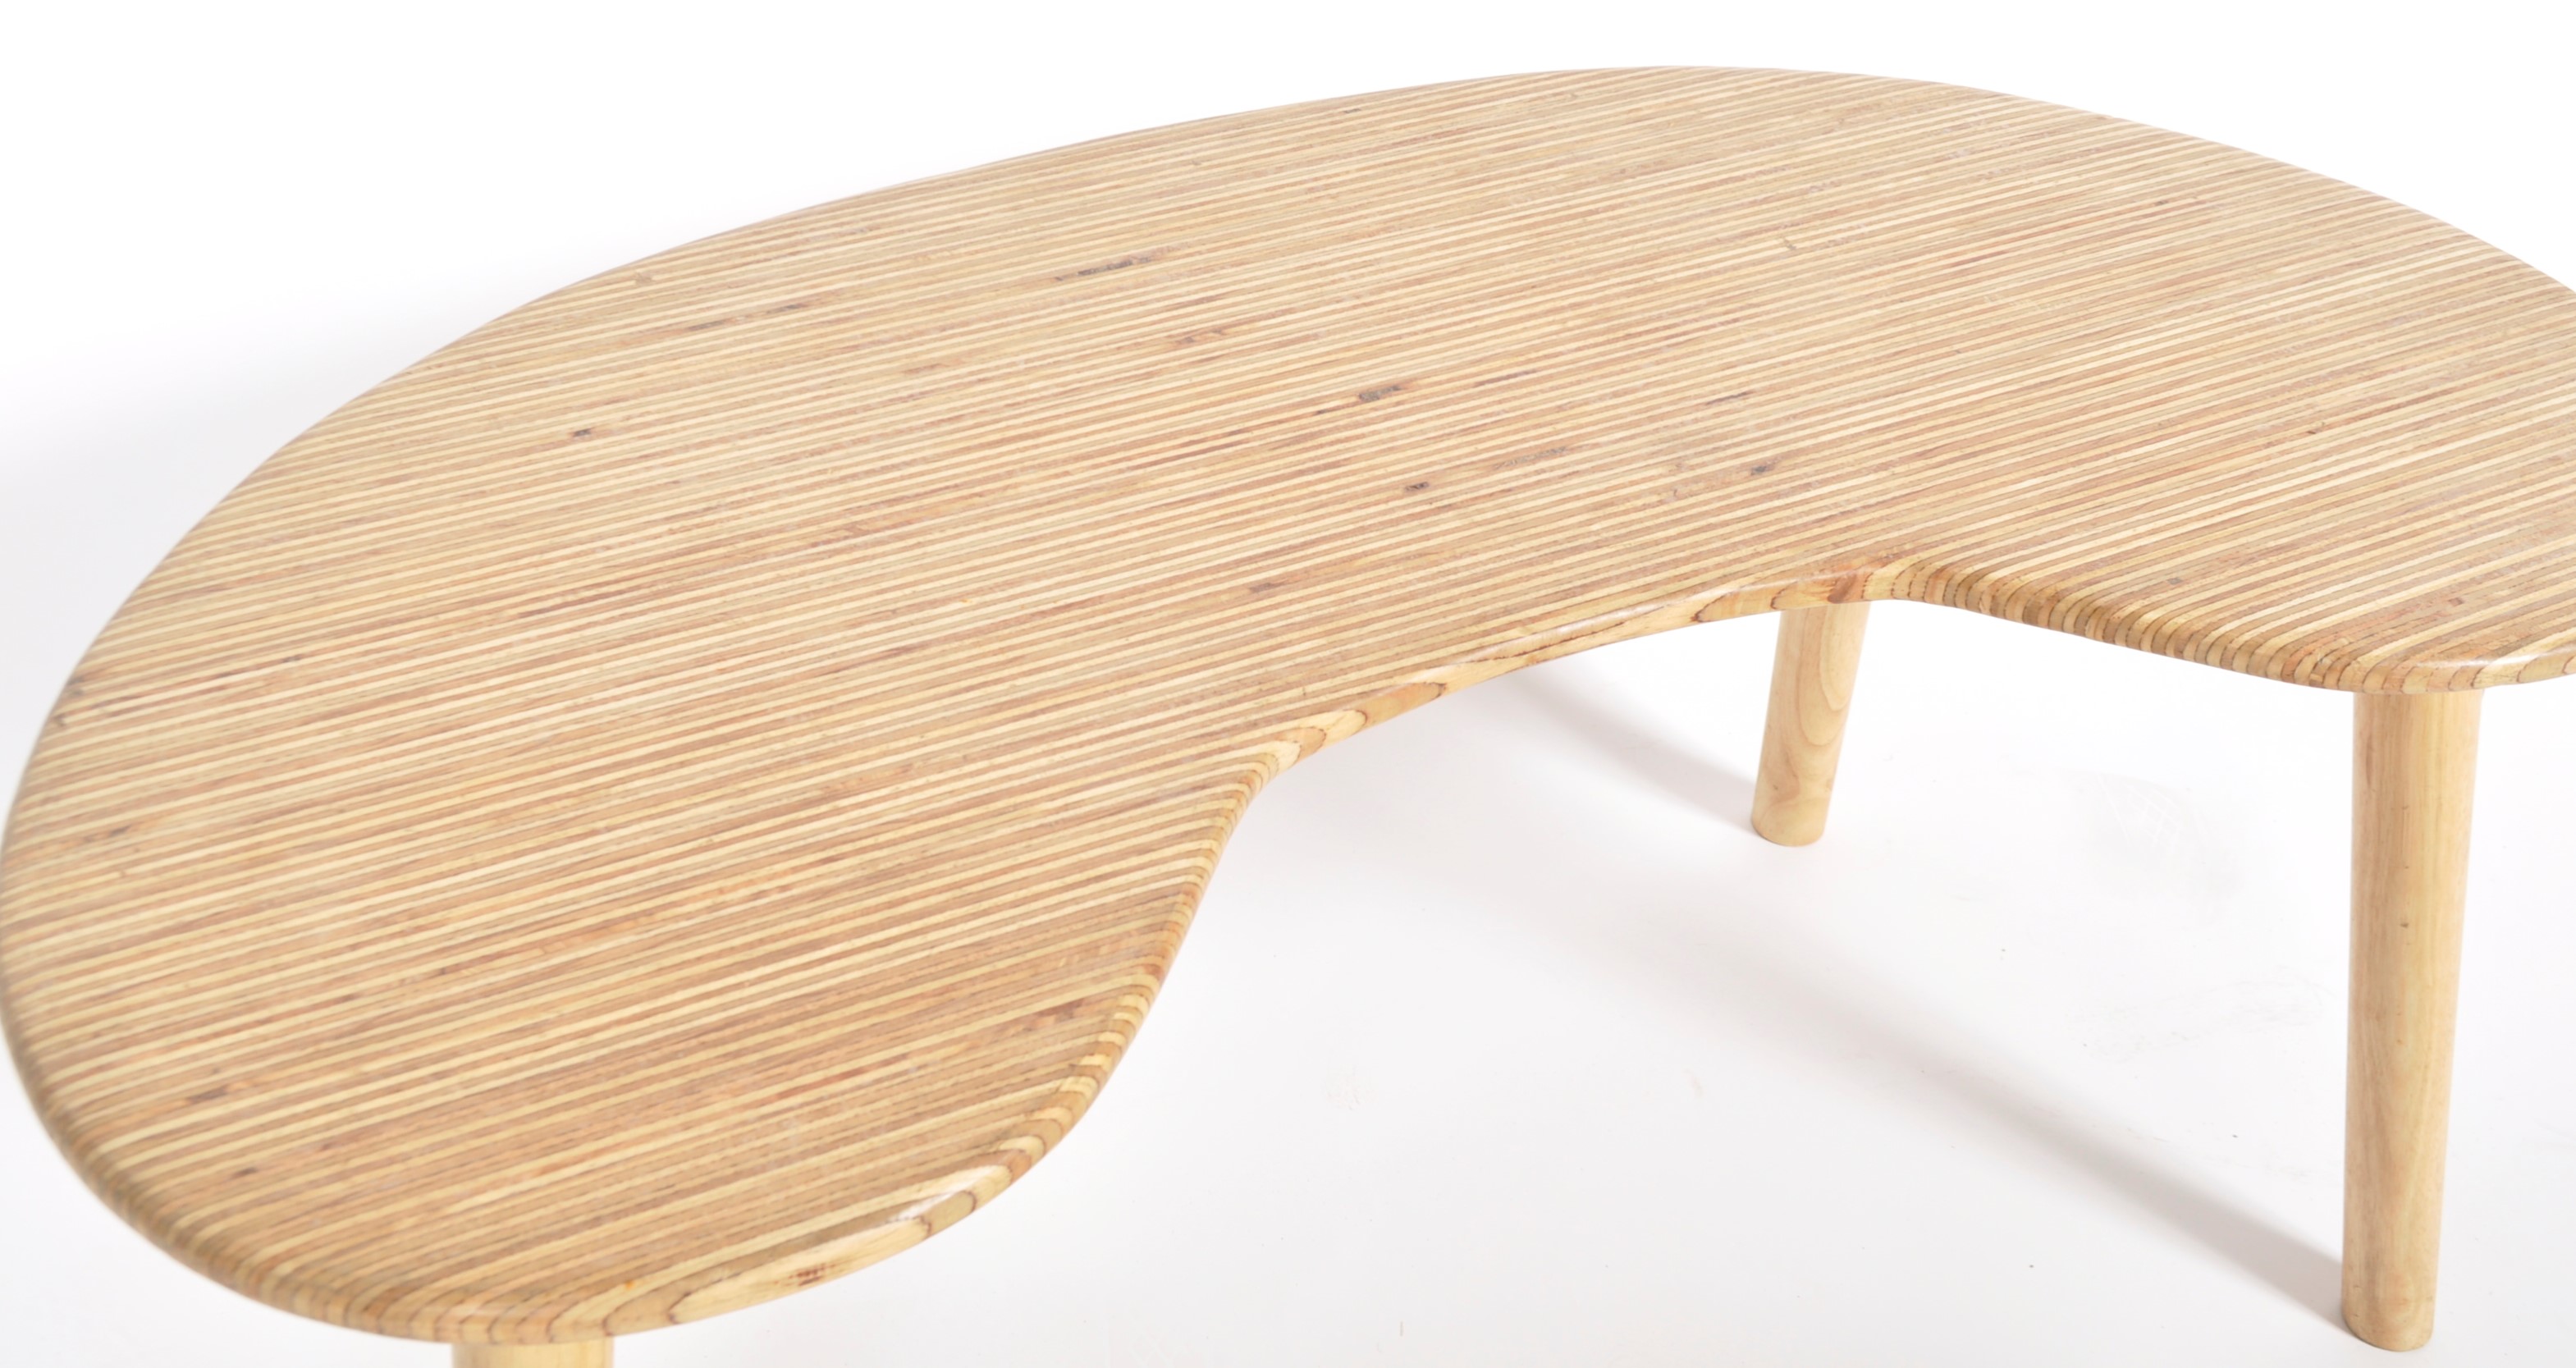 PAIR OF RETRO KIDNEY SHAPED LOW TABLE - Image 5 of 5